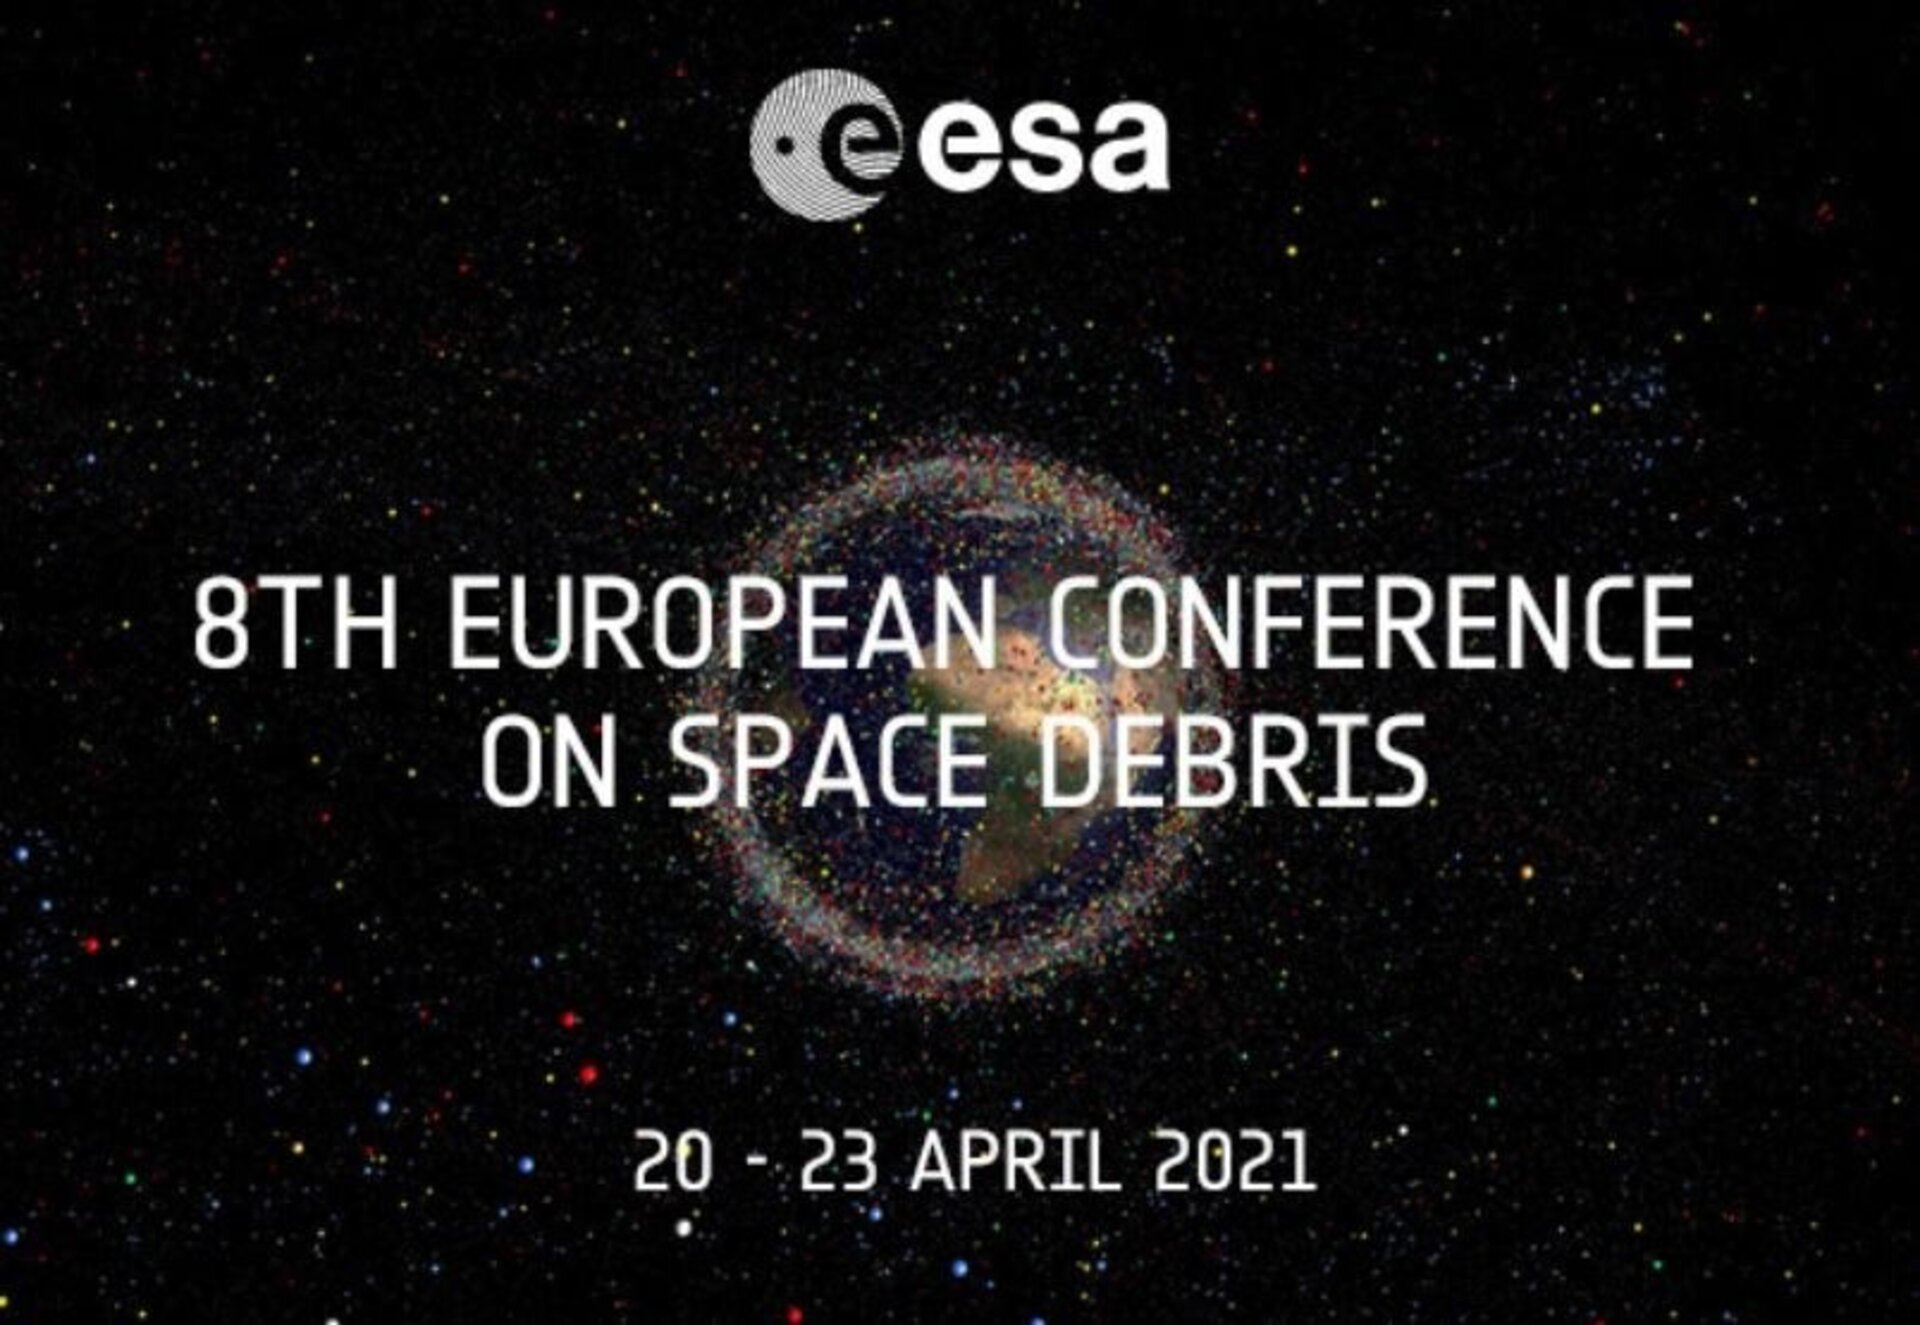 The ESA Space Debris Conference took place from 20 - 23 April 2021